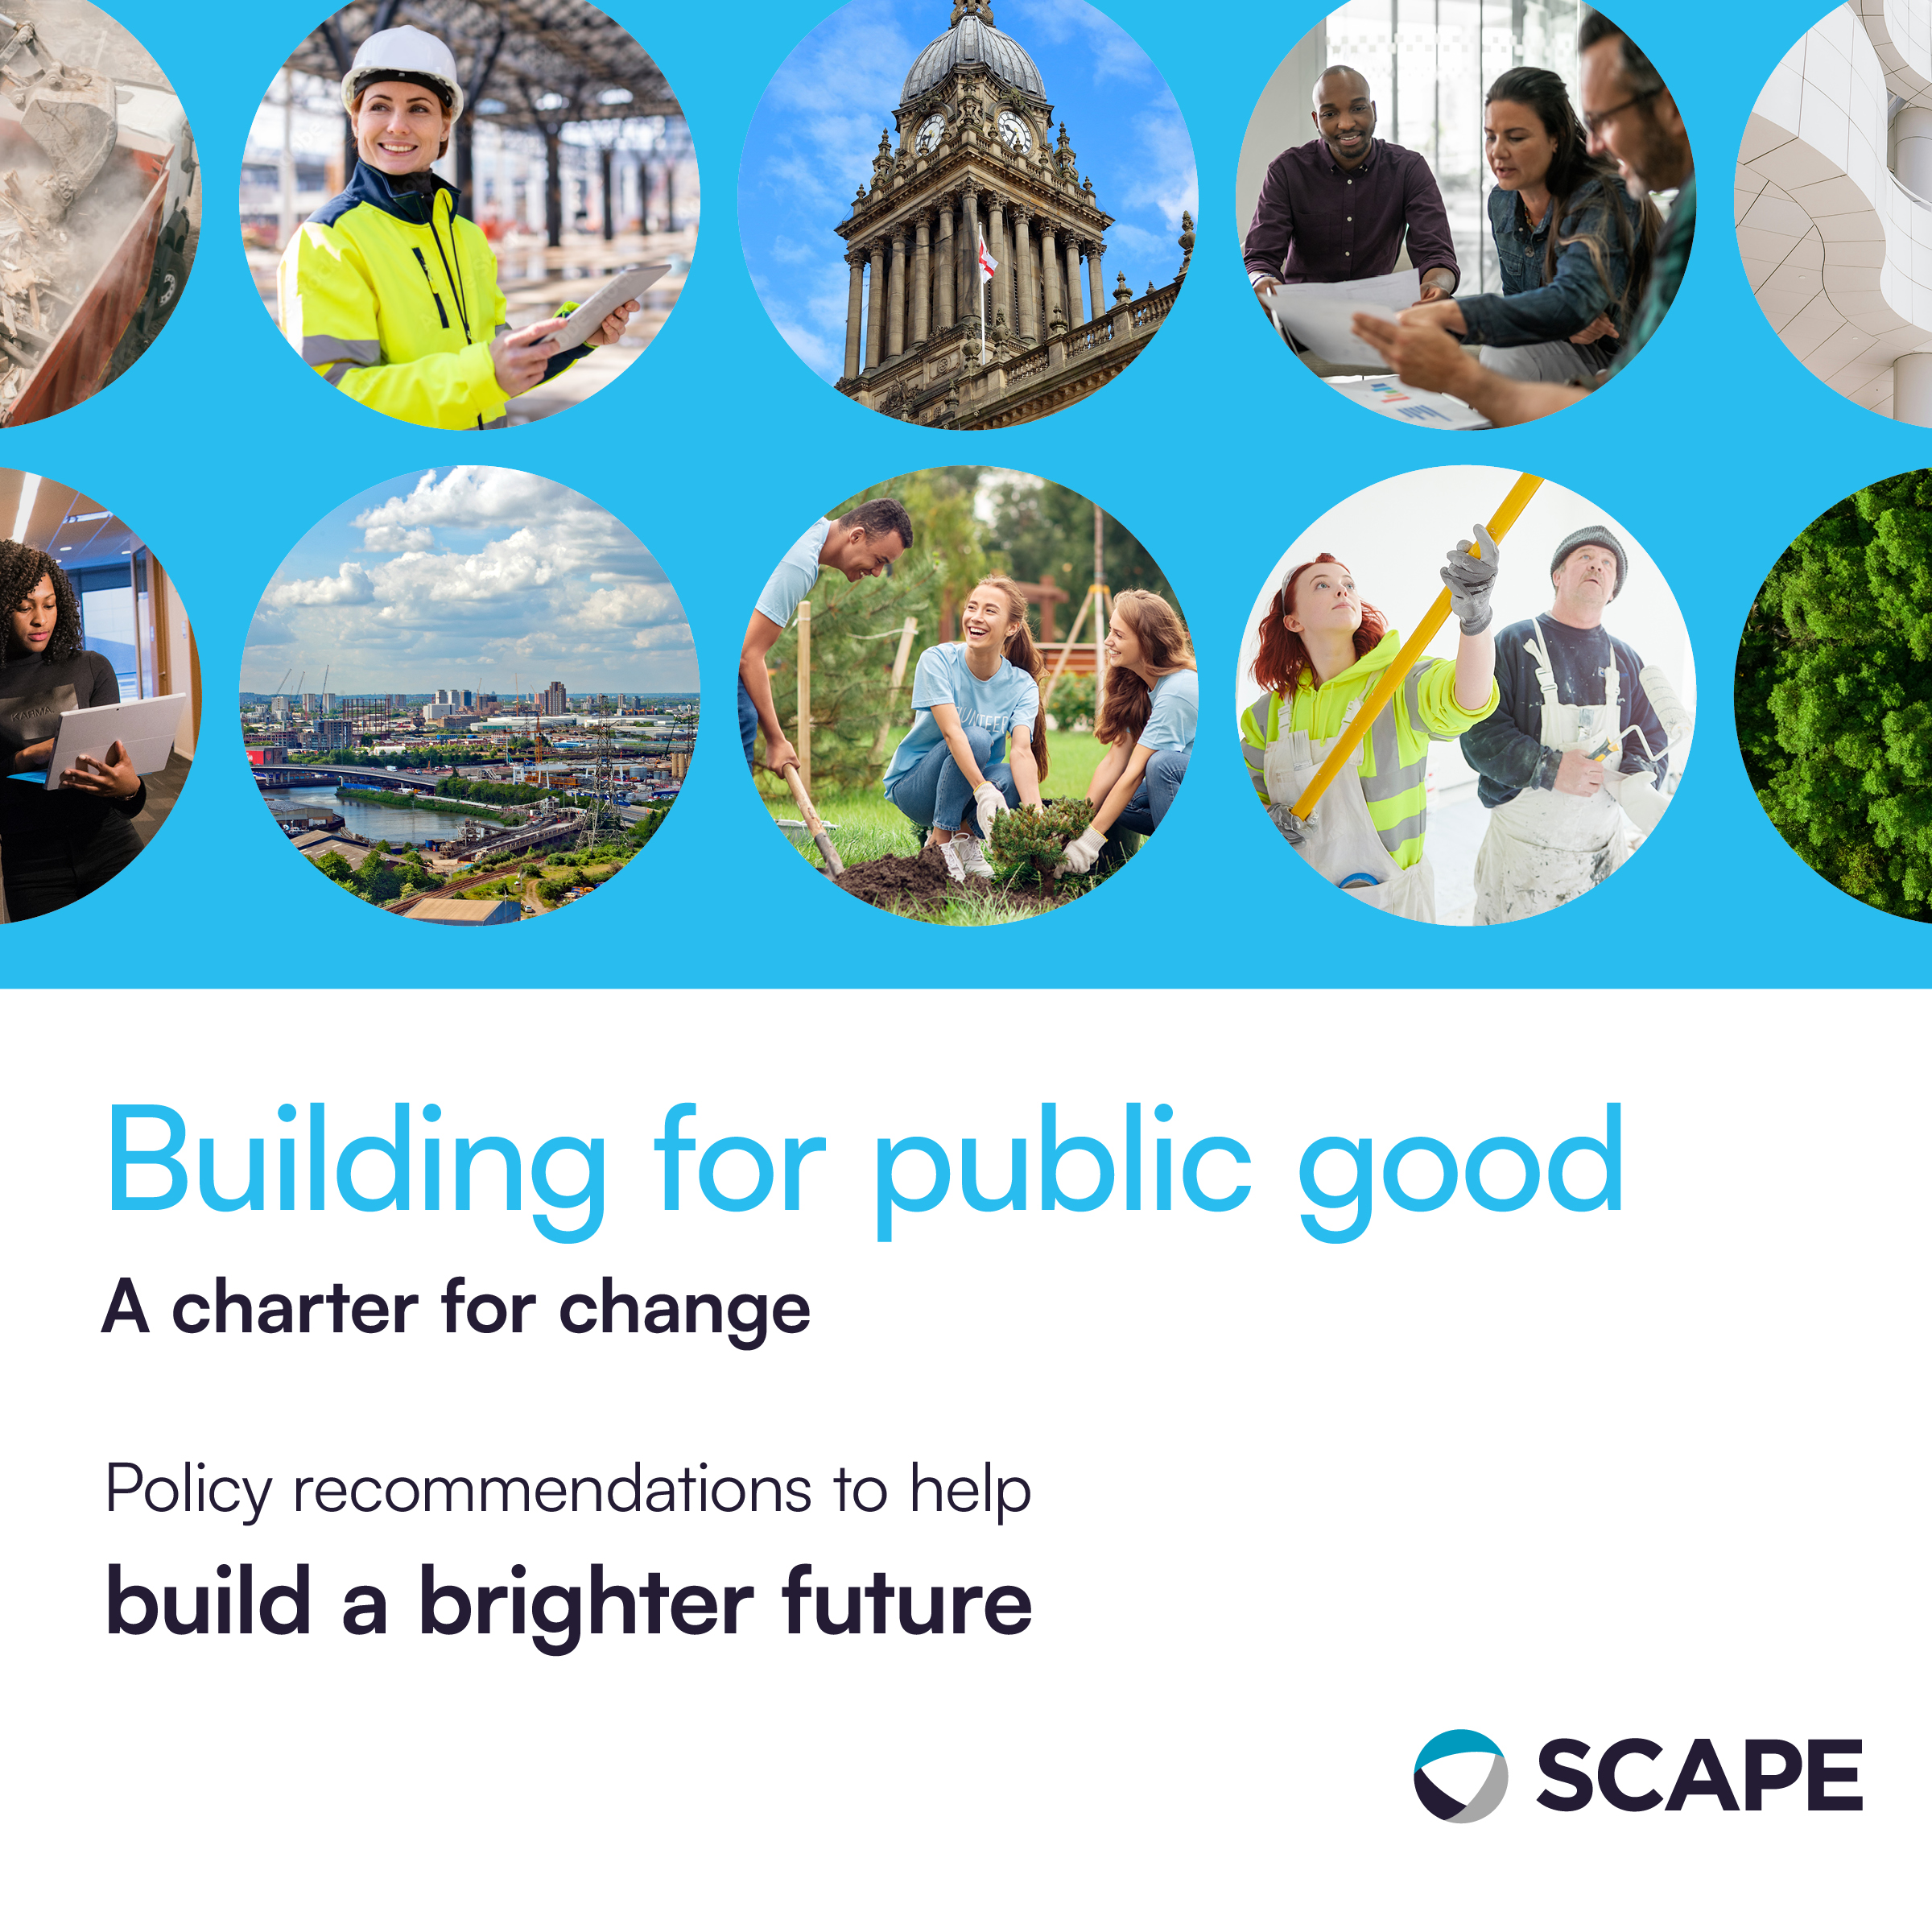 SCAPE launches Charter for Change calling for government to tackle construction waste